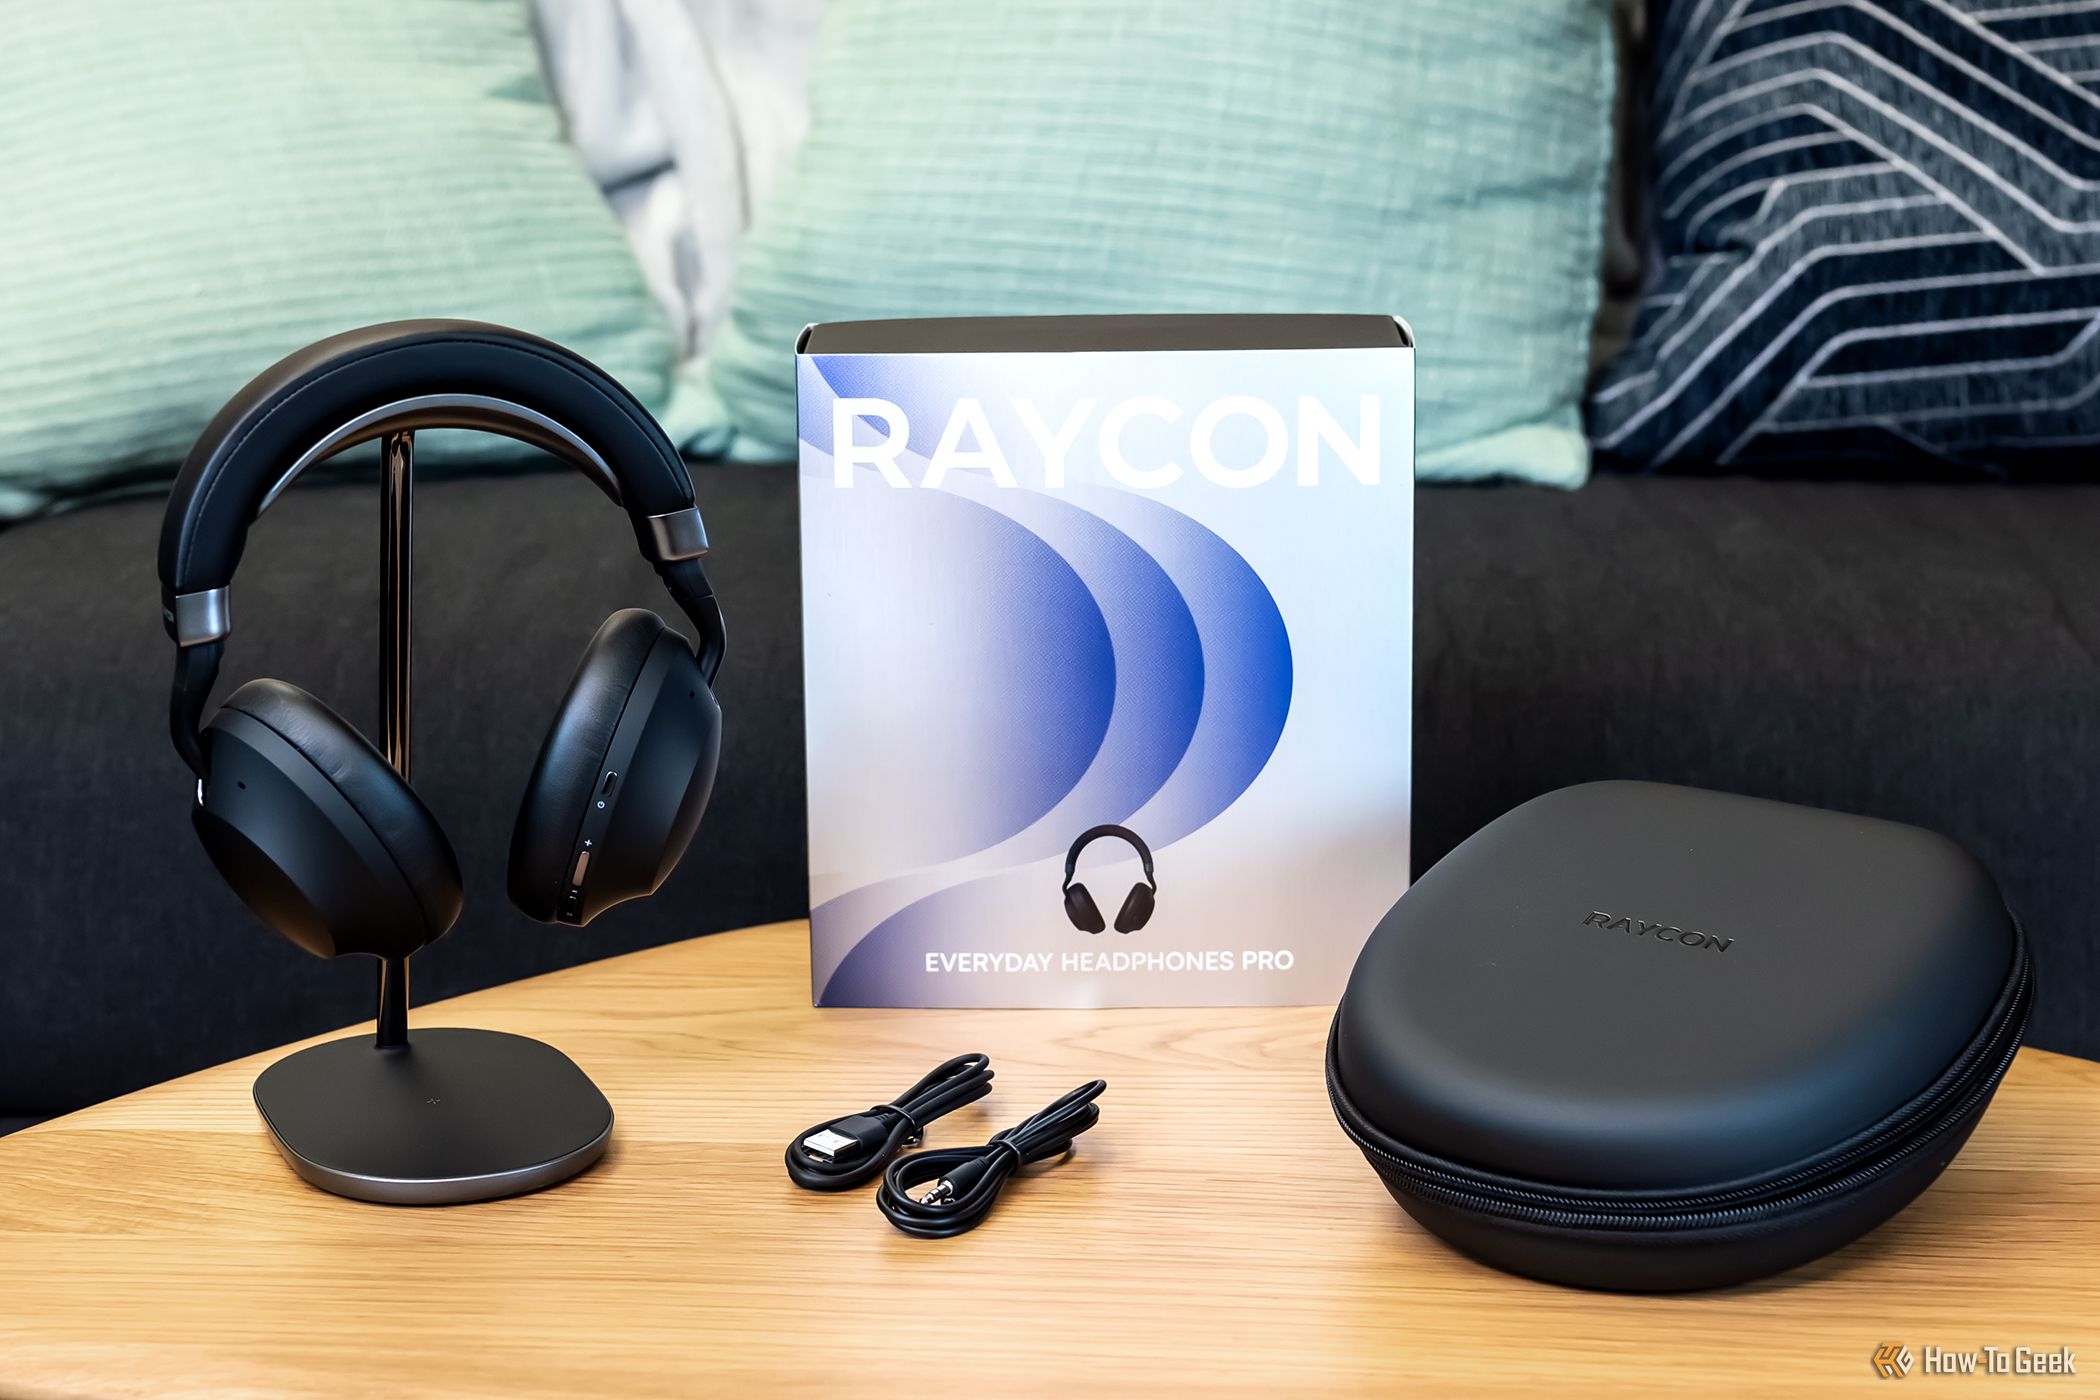 The box and case with a pair of Raycon Everyday Headphones Pro.